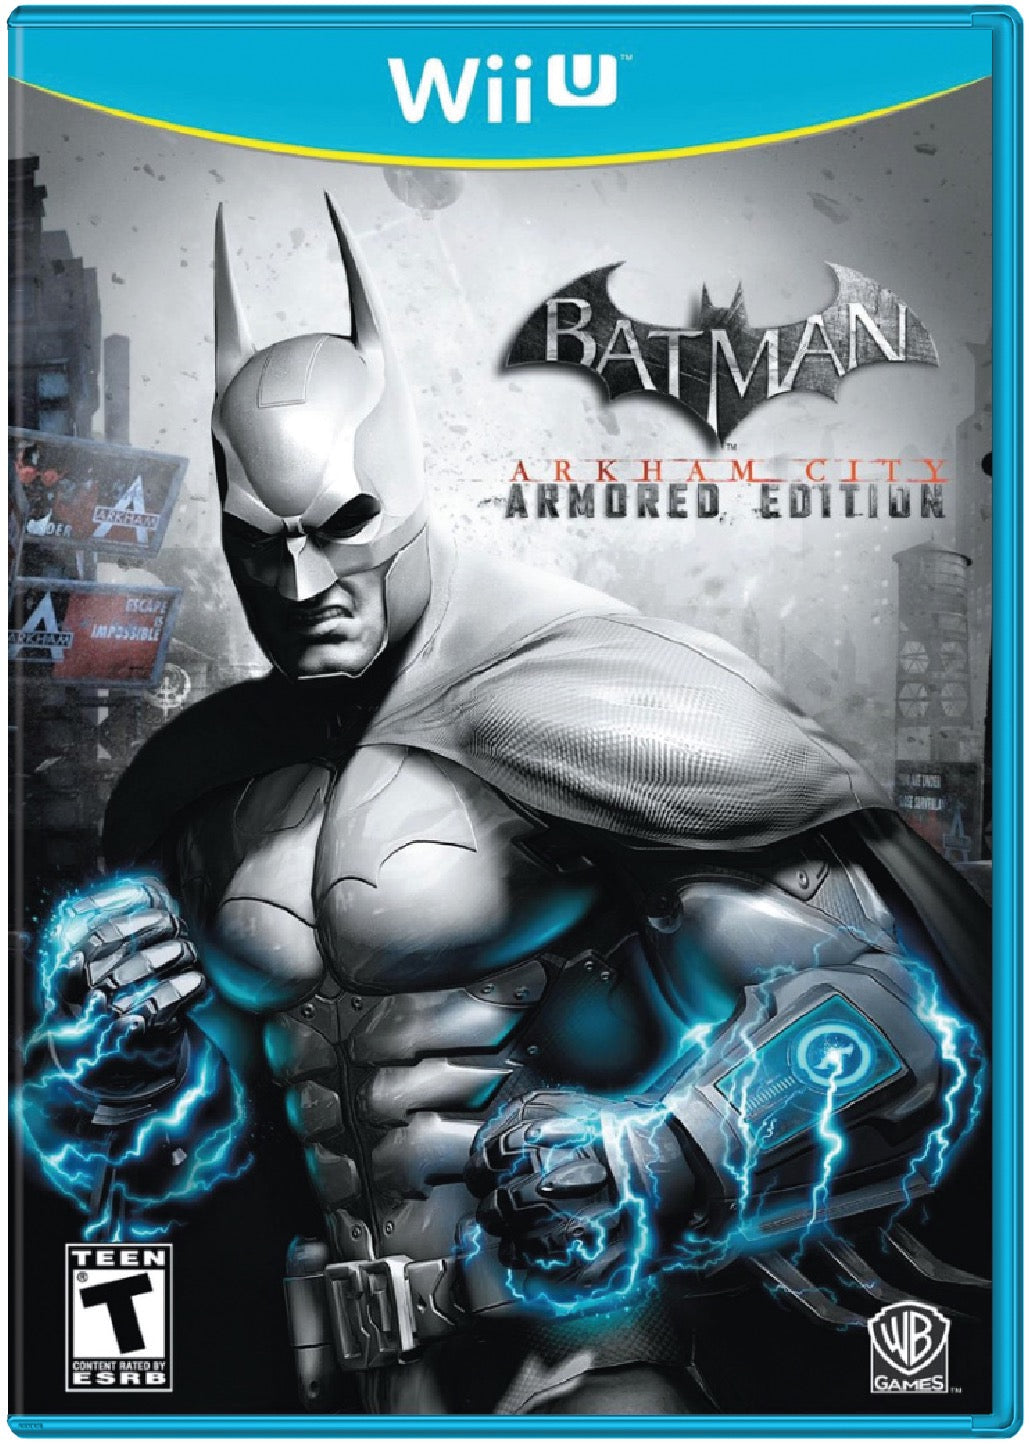 Batman Arkham City Armored Edition Cover Art and Product Photo